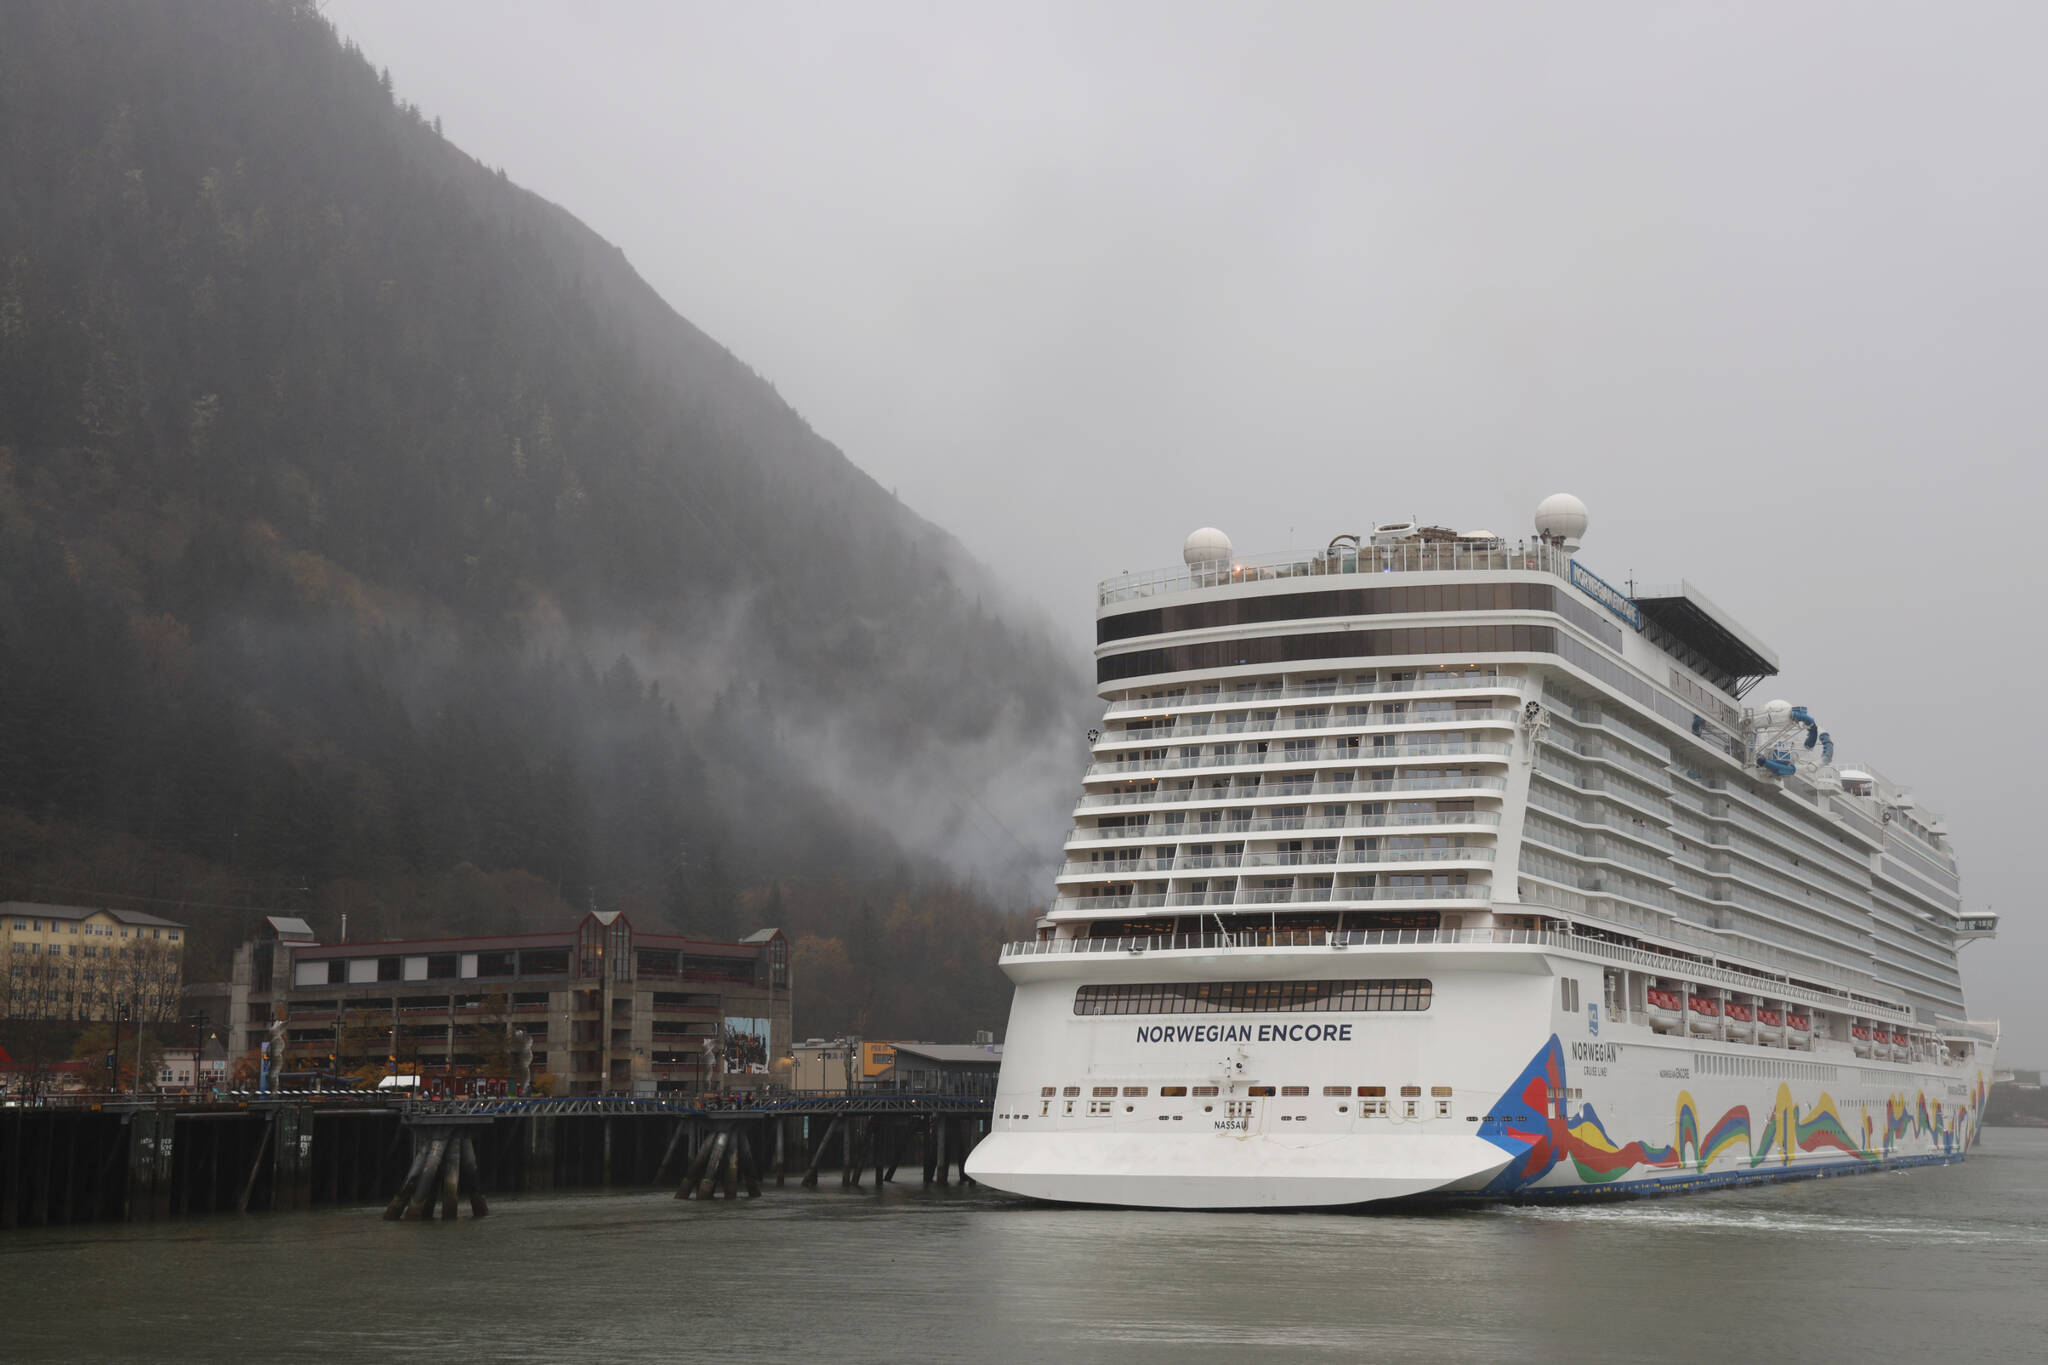 Clarise Larson / Juneau Empire
The final cruise ship, Norwegian Cruise Line’s Norwegian Encore, sailed out of Juneau Tuesday night marking the end of another tourism season that, according to officials, brought near pre-pandemic numbers of visitors to the capital city.